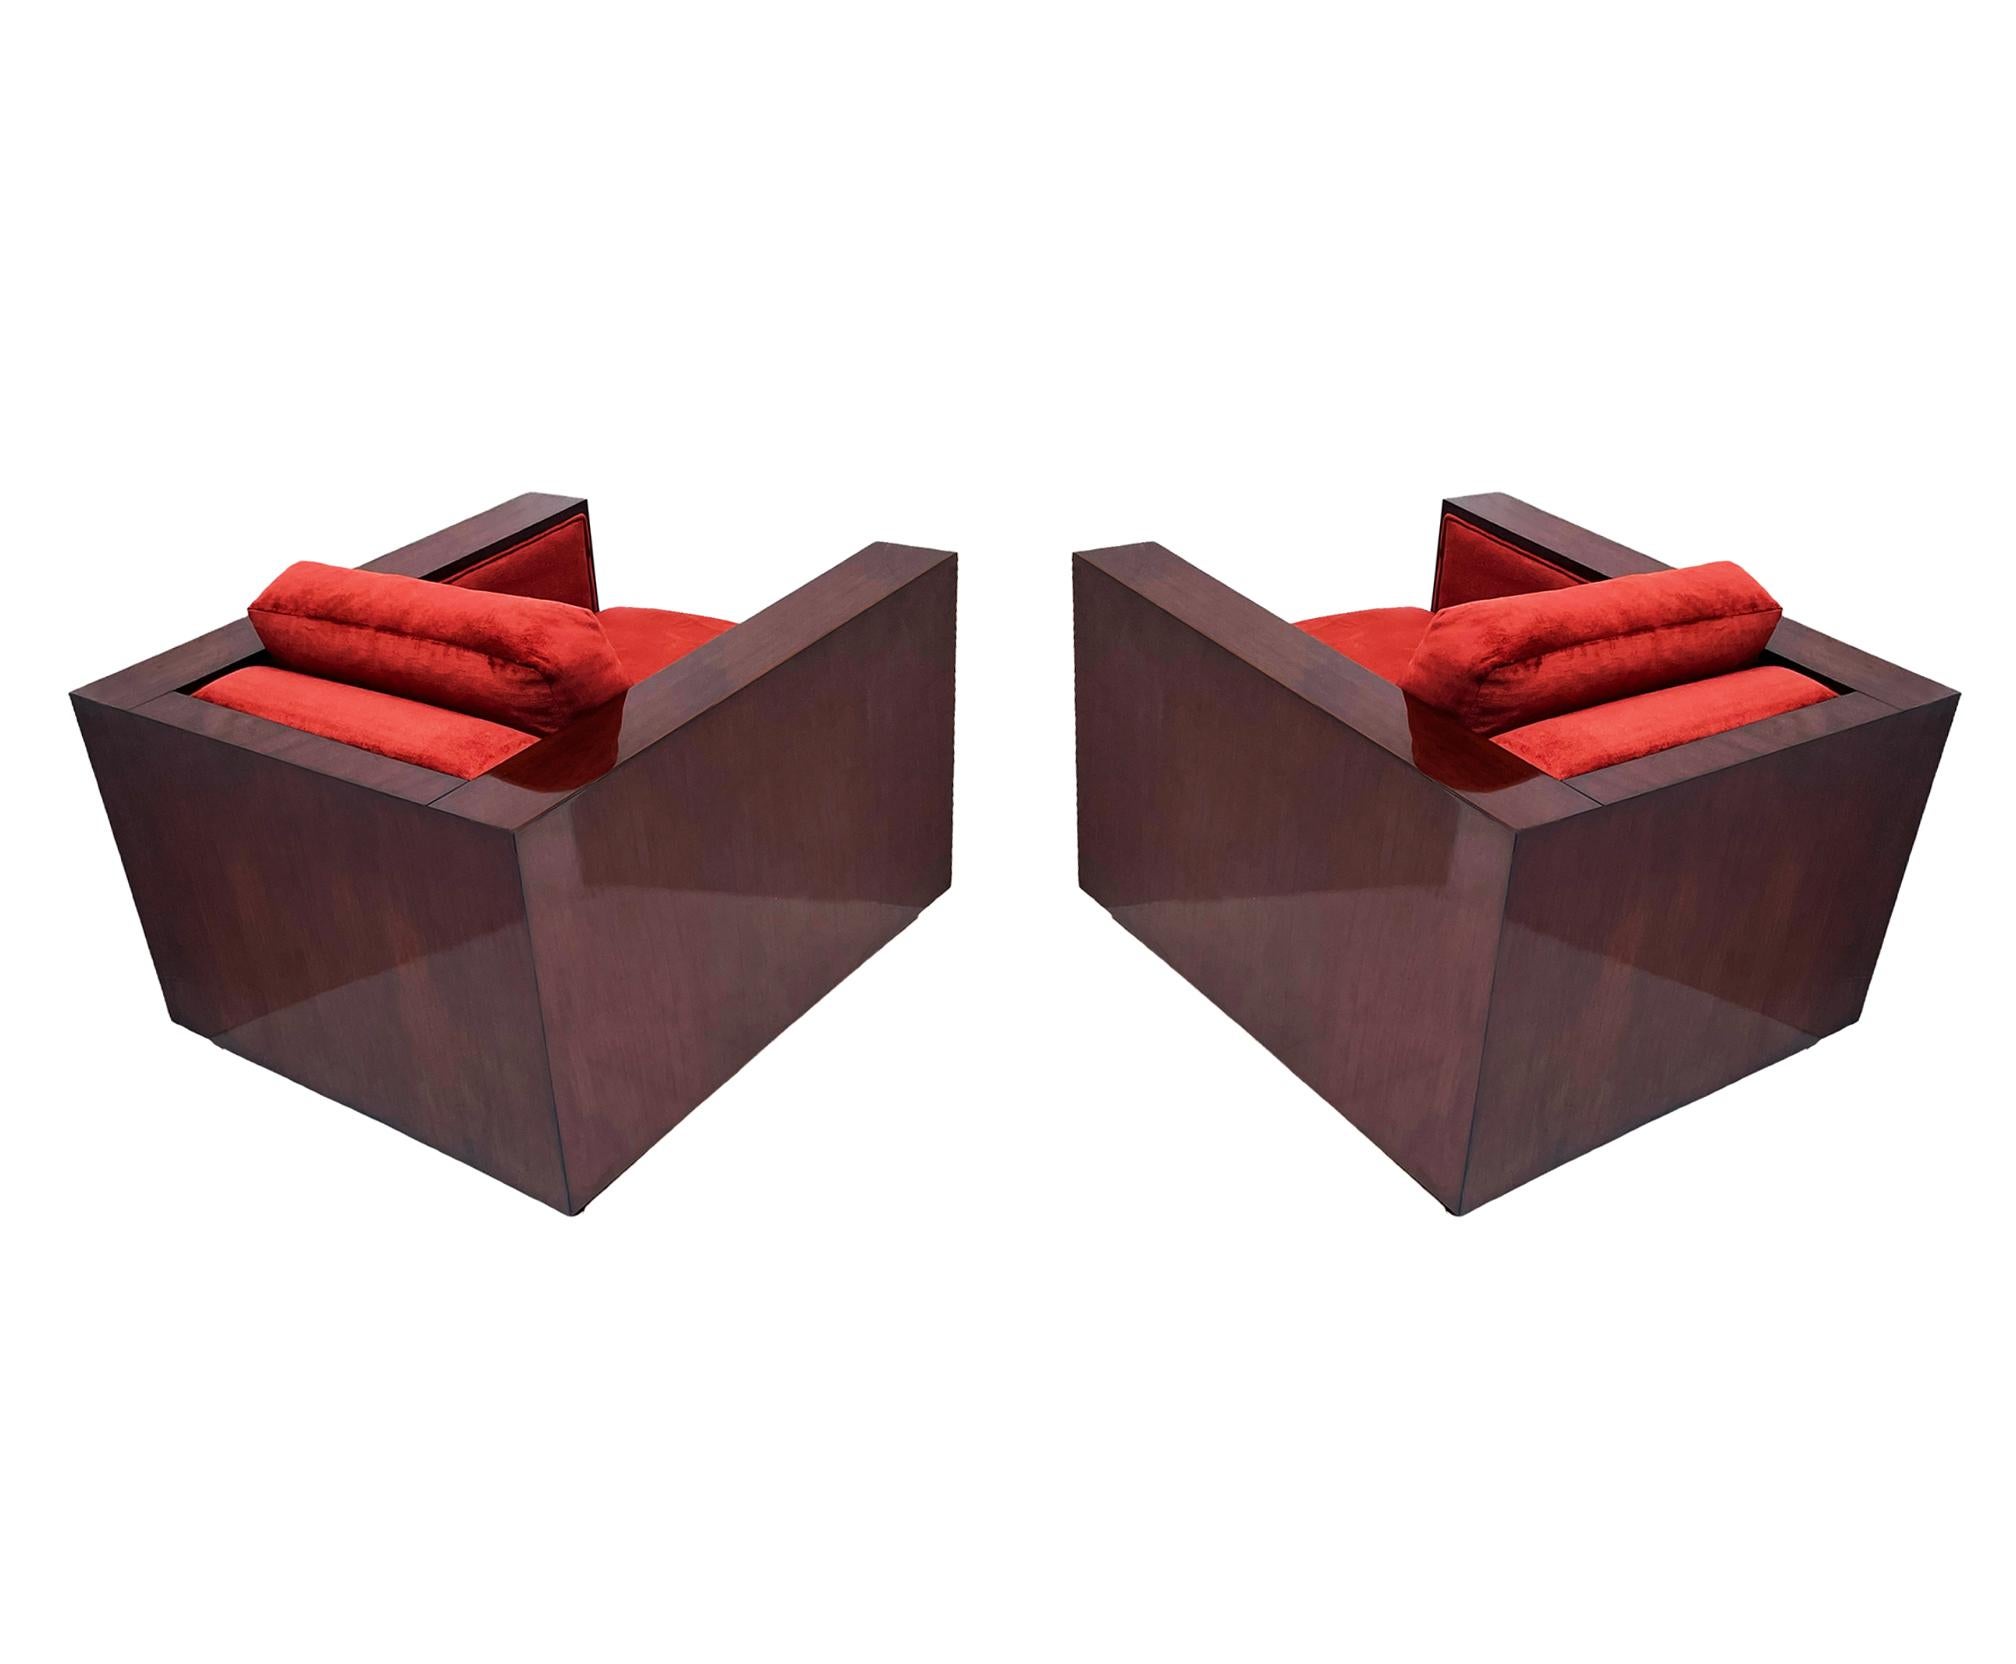 American Pair of Mid Century Art Deco Mahogany Cube Club Chairs by Ralph Lauren  For Sale